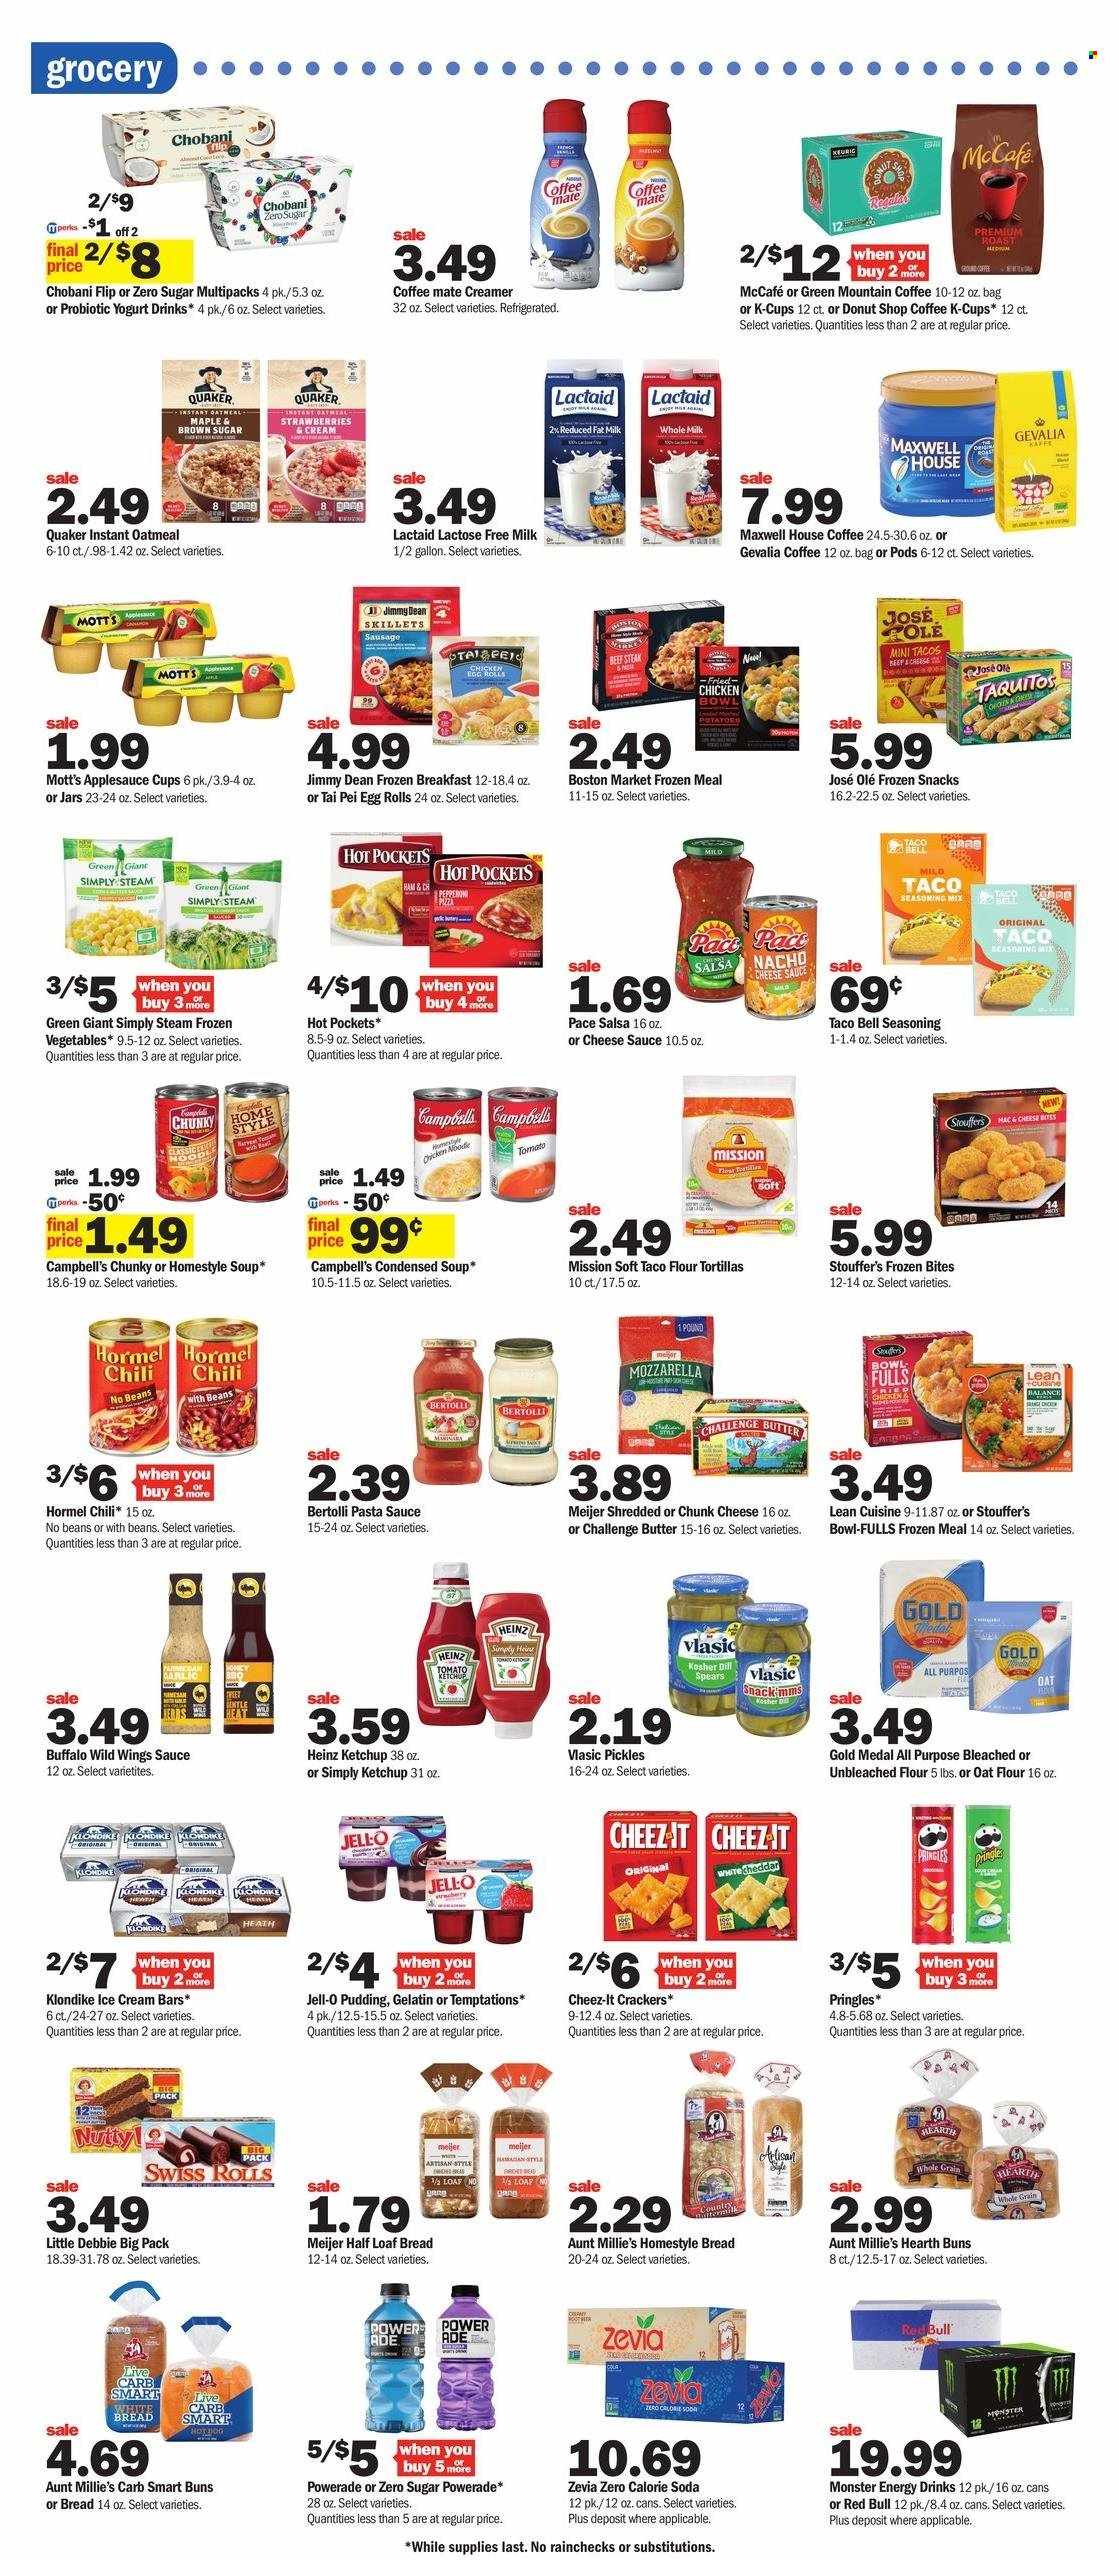 thumbnail - Meijer Flyer - 01/29/2023 - 02/04/2023 - Sales products - bread, tortillas, white bread, buns, tacos, flour tortillas, Mott's, Campbell's, hot pocket, pizza, pasta sauce, condensed soup, soup, sauce, egg rolls, Quaker, instant soup, Lean Cuisine, bowl-fulls, taquitos, Bertolli, Jimmy Dean, Hormel, sausage, Lactaid, chunk cheese, pudding, yoghurt, probiotic yoghurt, Chobani, Coffee-Mate, milk, lactose free milk, yoghurt drink, creamer, ice cream, ice cream bars, frozen vegetables, Stouffer's, snack, crackers, Pringles, Cheez-It, oatmeal, Jell-O, Heinz, pickles, spice, ketchup, salsa, apple sauce, Powerade, energy drink, Monster, Red Bull, Monster Energy, soda, Maxwell House, coffee capsules, McCafe, K-Cups, Gevalia, Green Mountain, steak, Gain, jar, gelatin. Page 3.